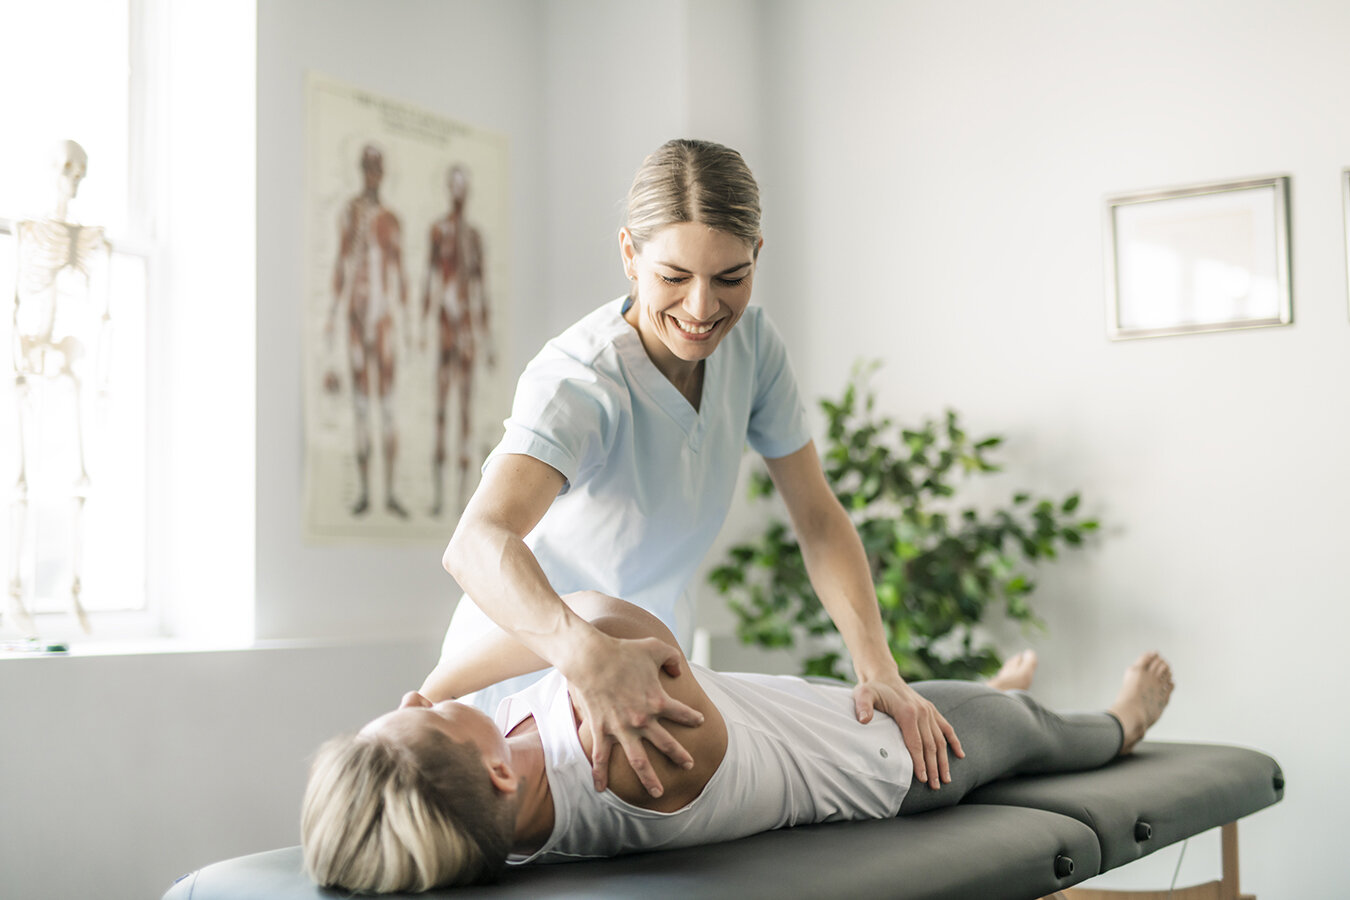   PHYSIOTHERAPY    learn more  